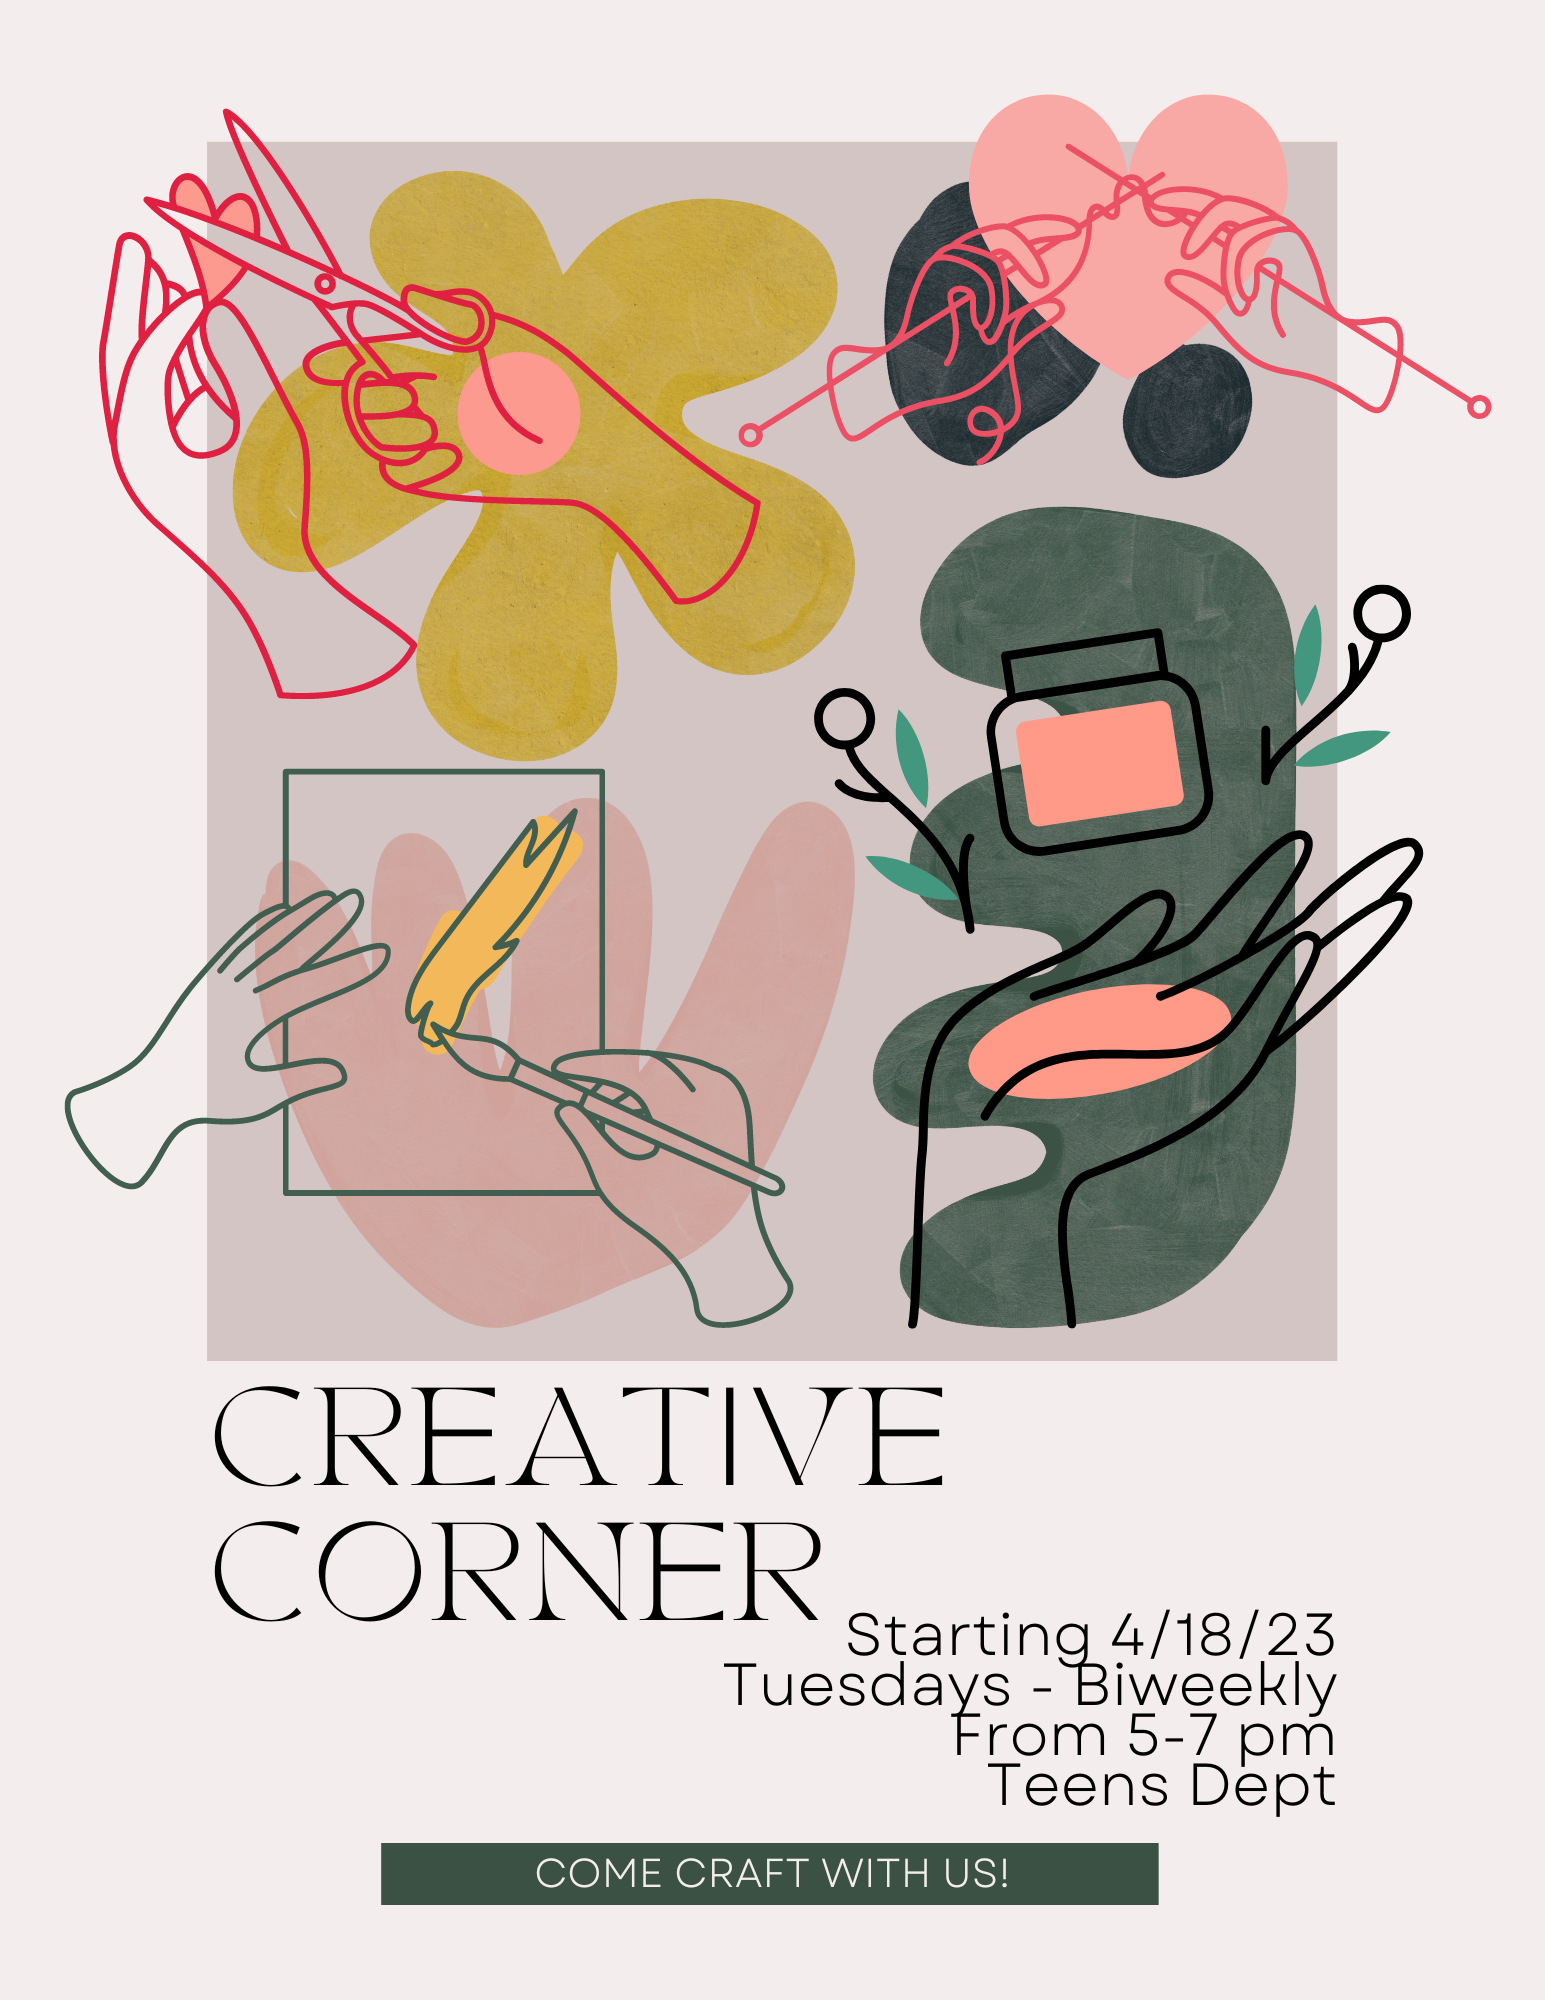 Creative Corner. Starting 4/18/23 Tuesdays - Biweekly From 5-7 pm Teens Dept. Come craft with us!